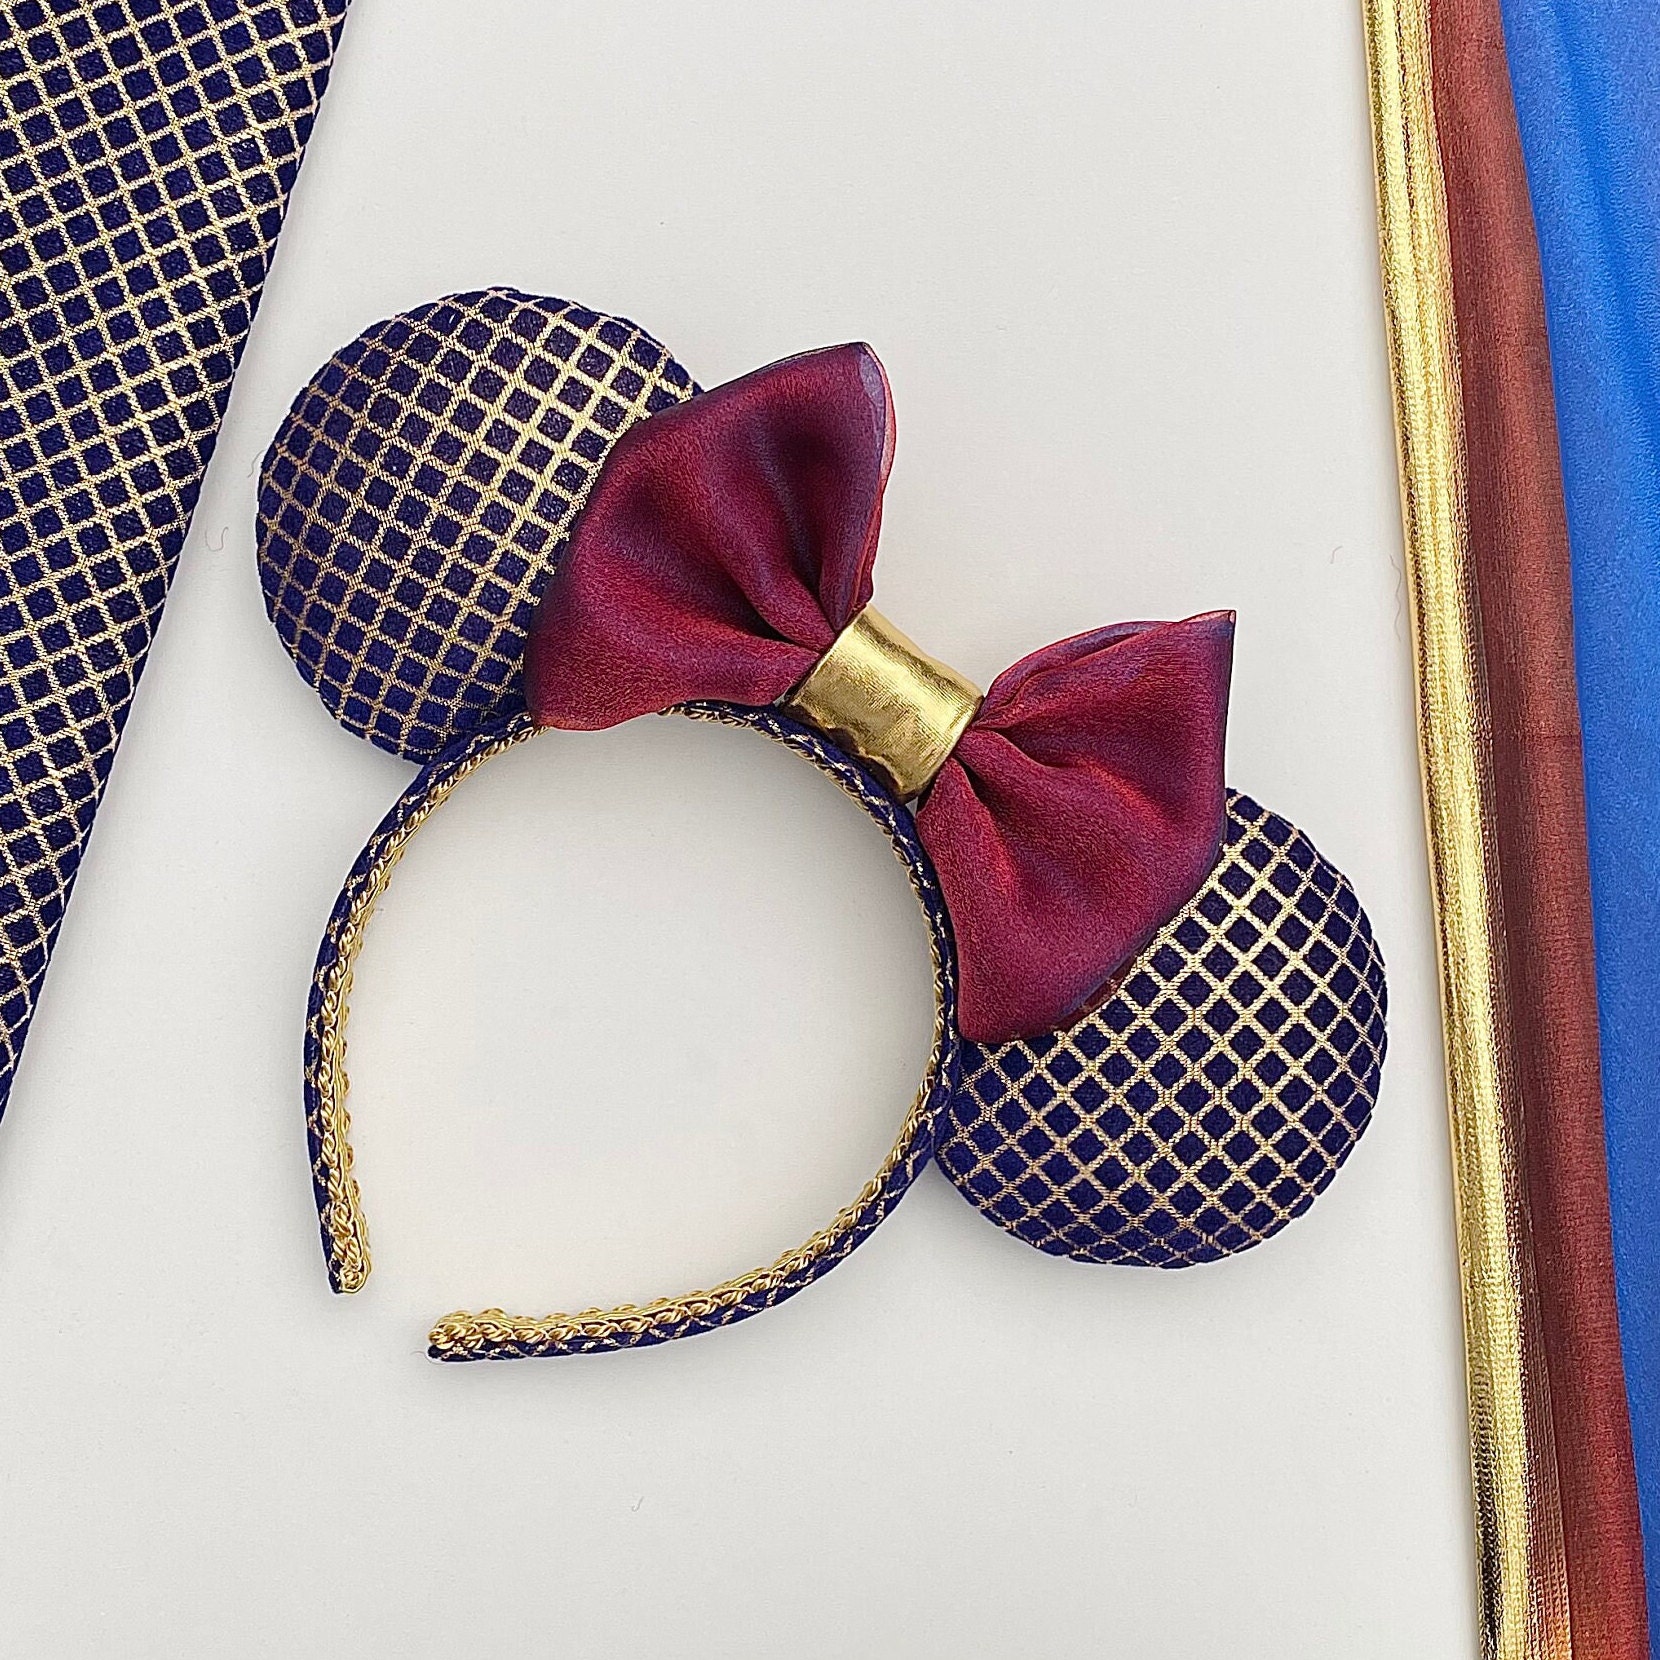 Mouse Secrets Disney Parks Epcot Blue Gingham Floral Checkered Minnie Ears Headband New